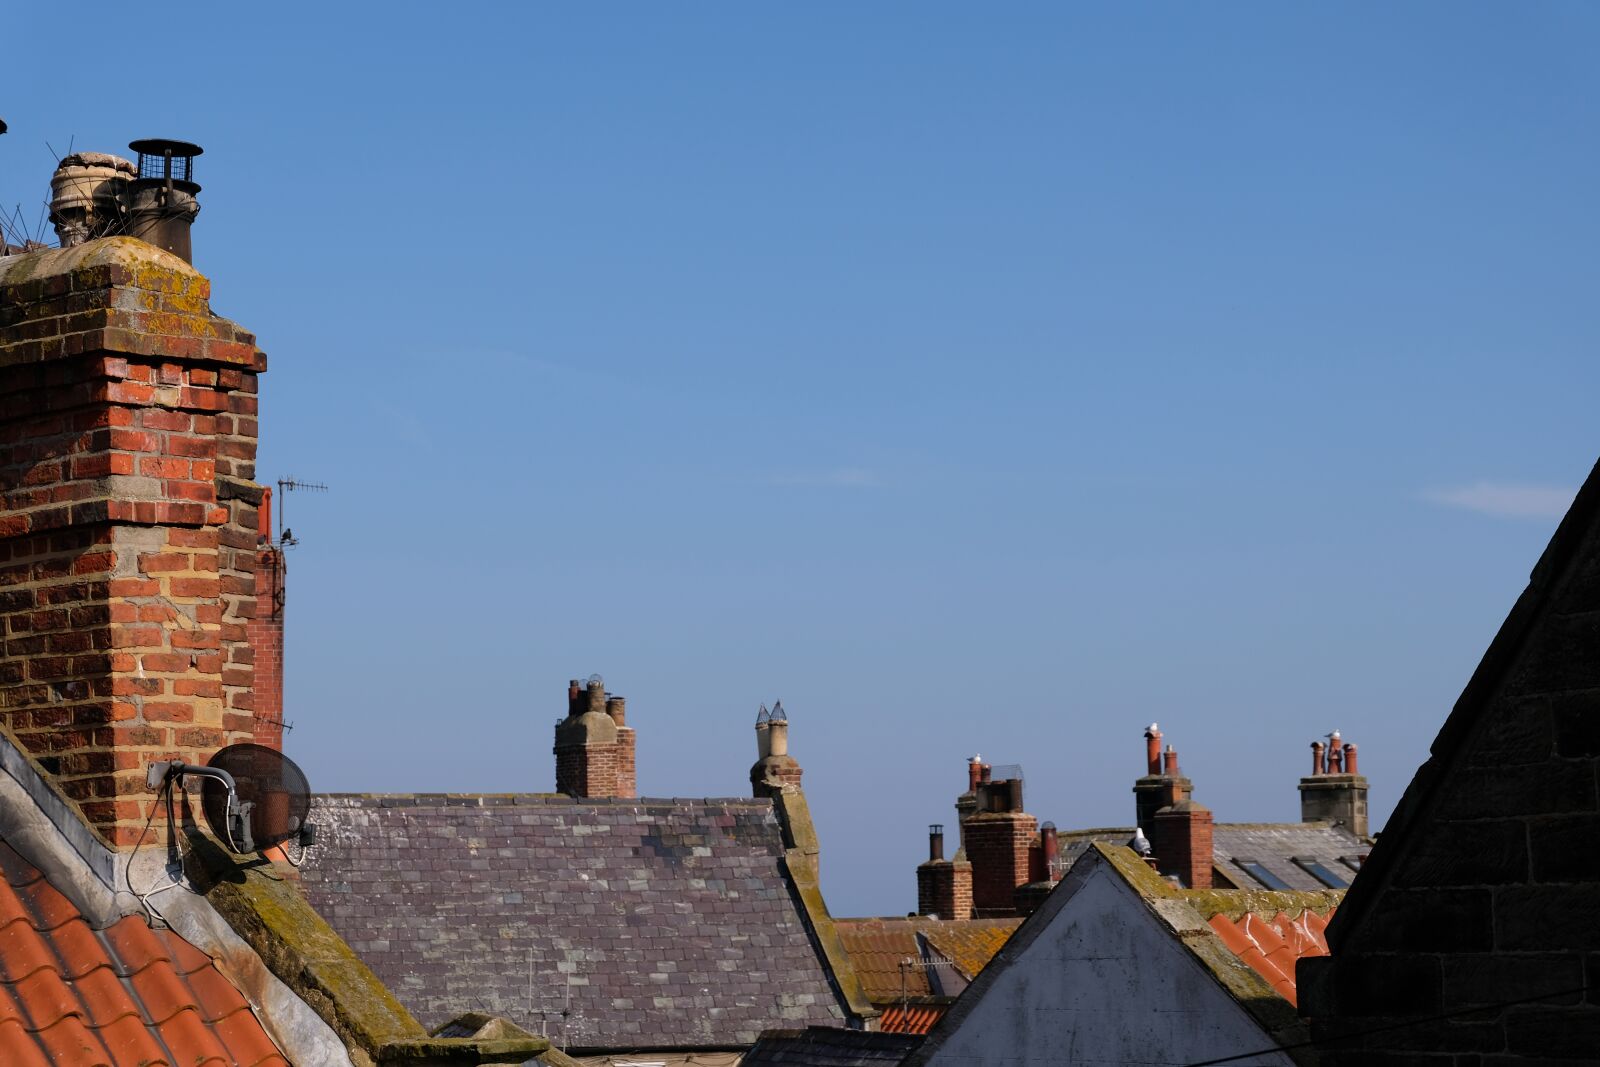 Fujifilm X-T20 sample photo. Roofs, seagulls, roofscape photography